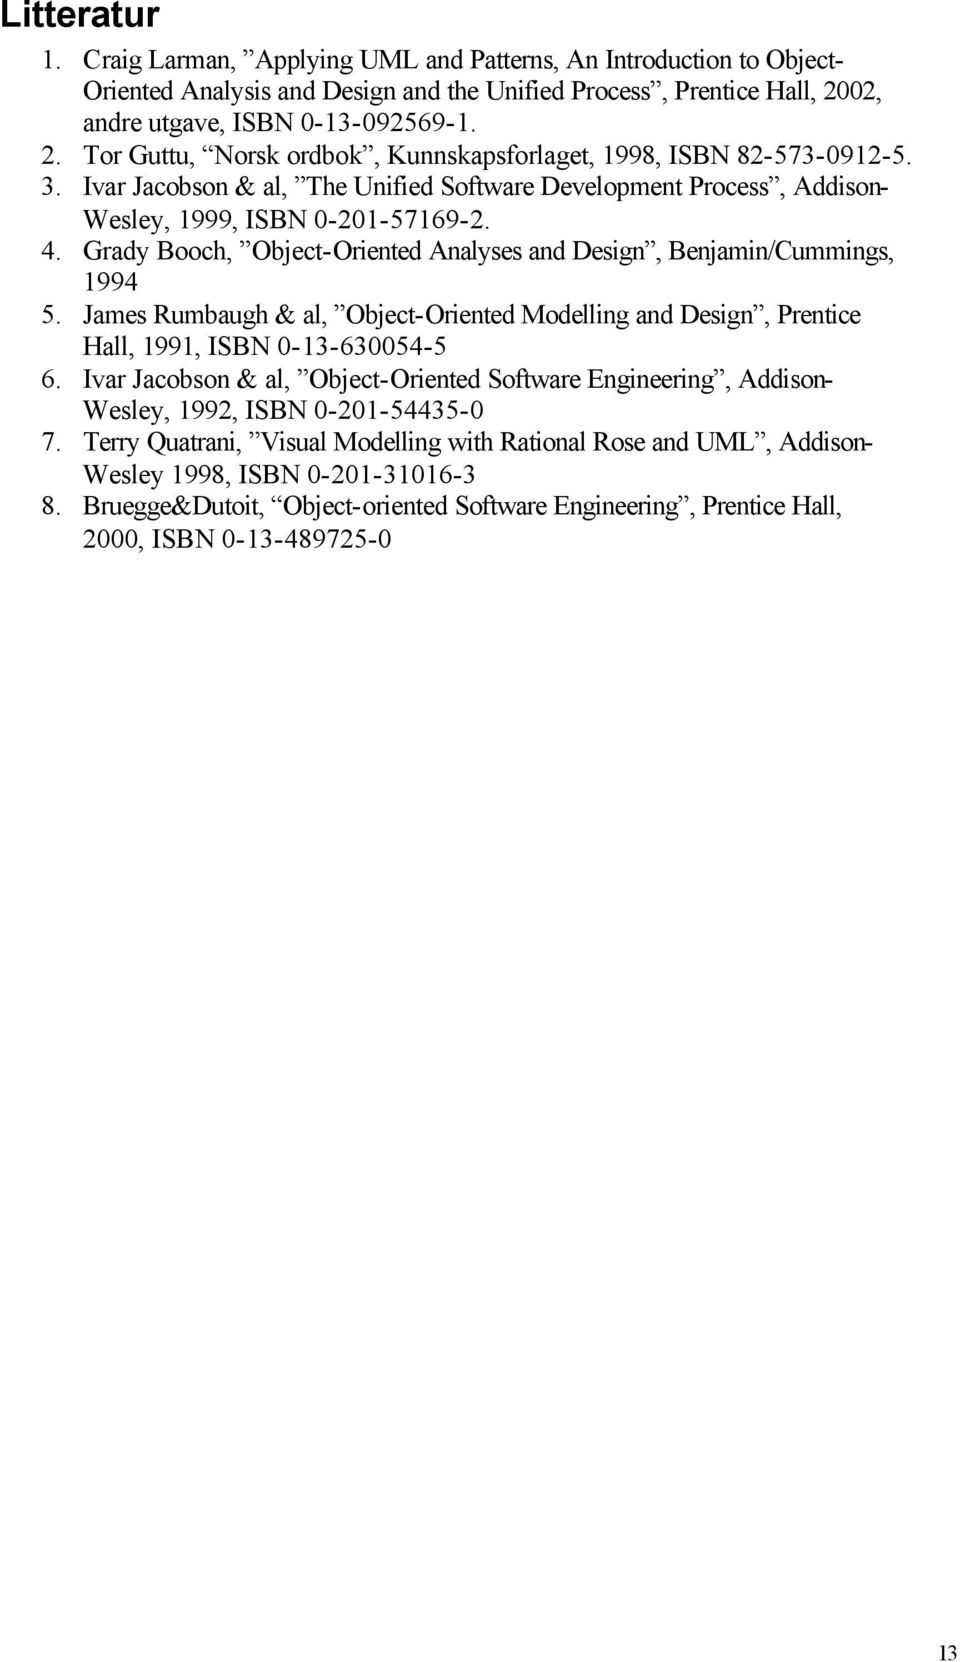 Ivar Jacobson & al, The Unified Software Development Process, Addison- Wesley, 1999, ISBN 0-201-57169-2. 4. Grady Booch, Object-Oriented Analyses and Design, Benjamin/Cummings, 1994 5.